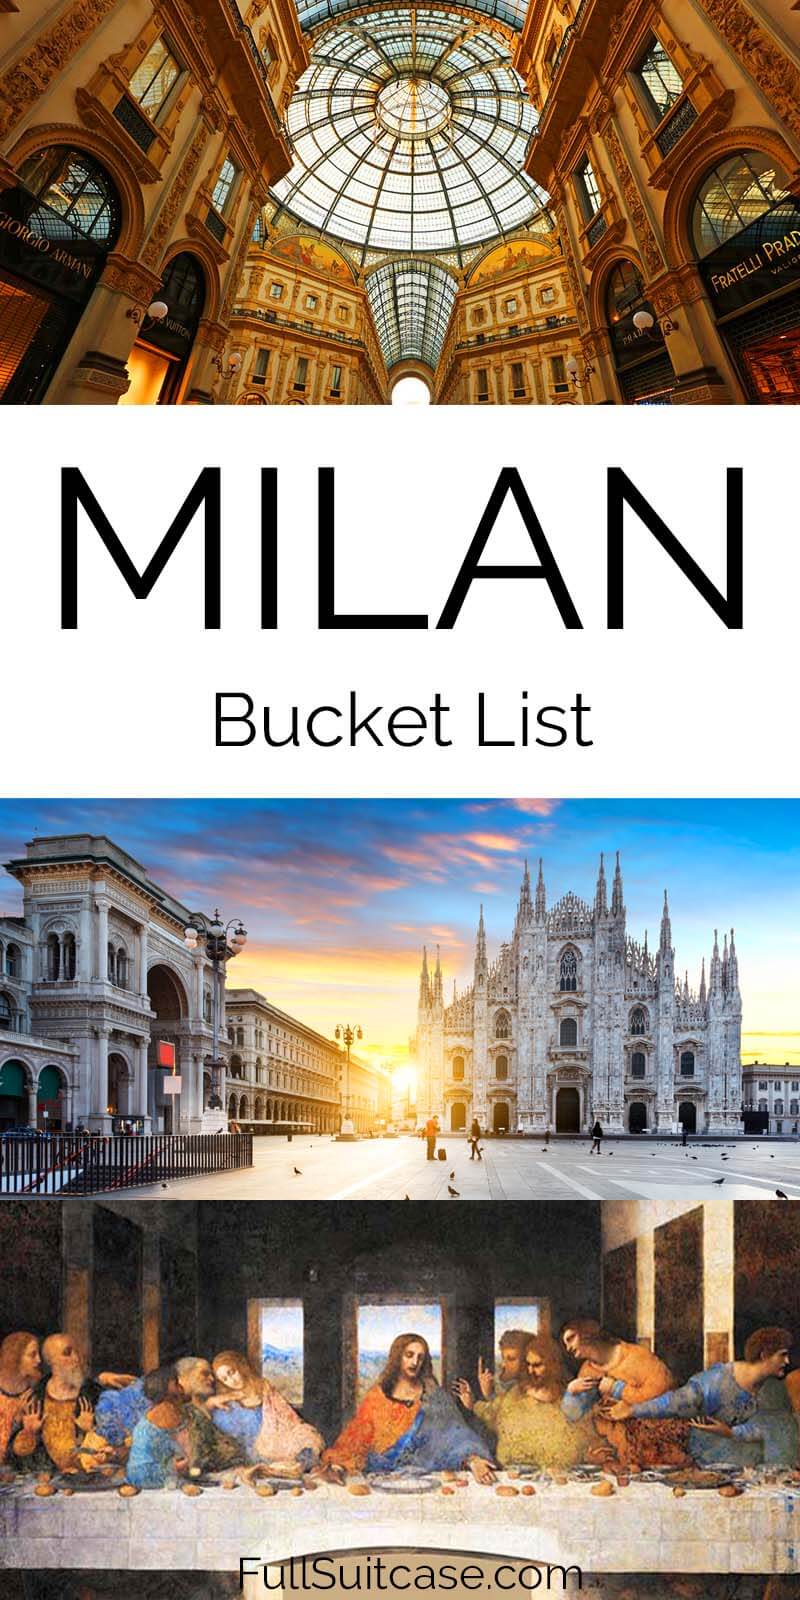 Milan bucket list - top sights and things to do in Milano Italy